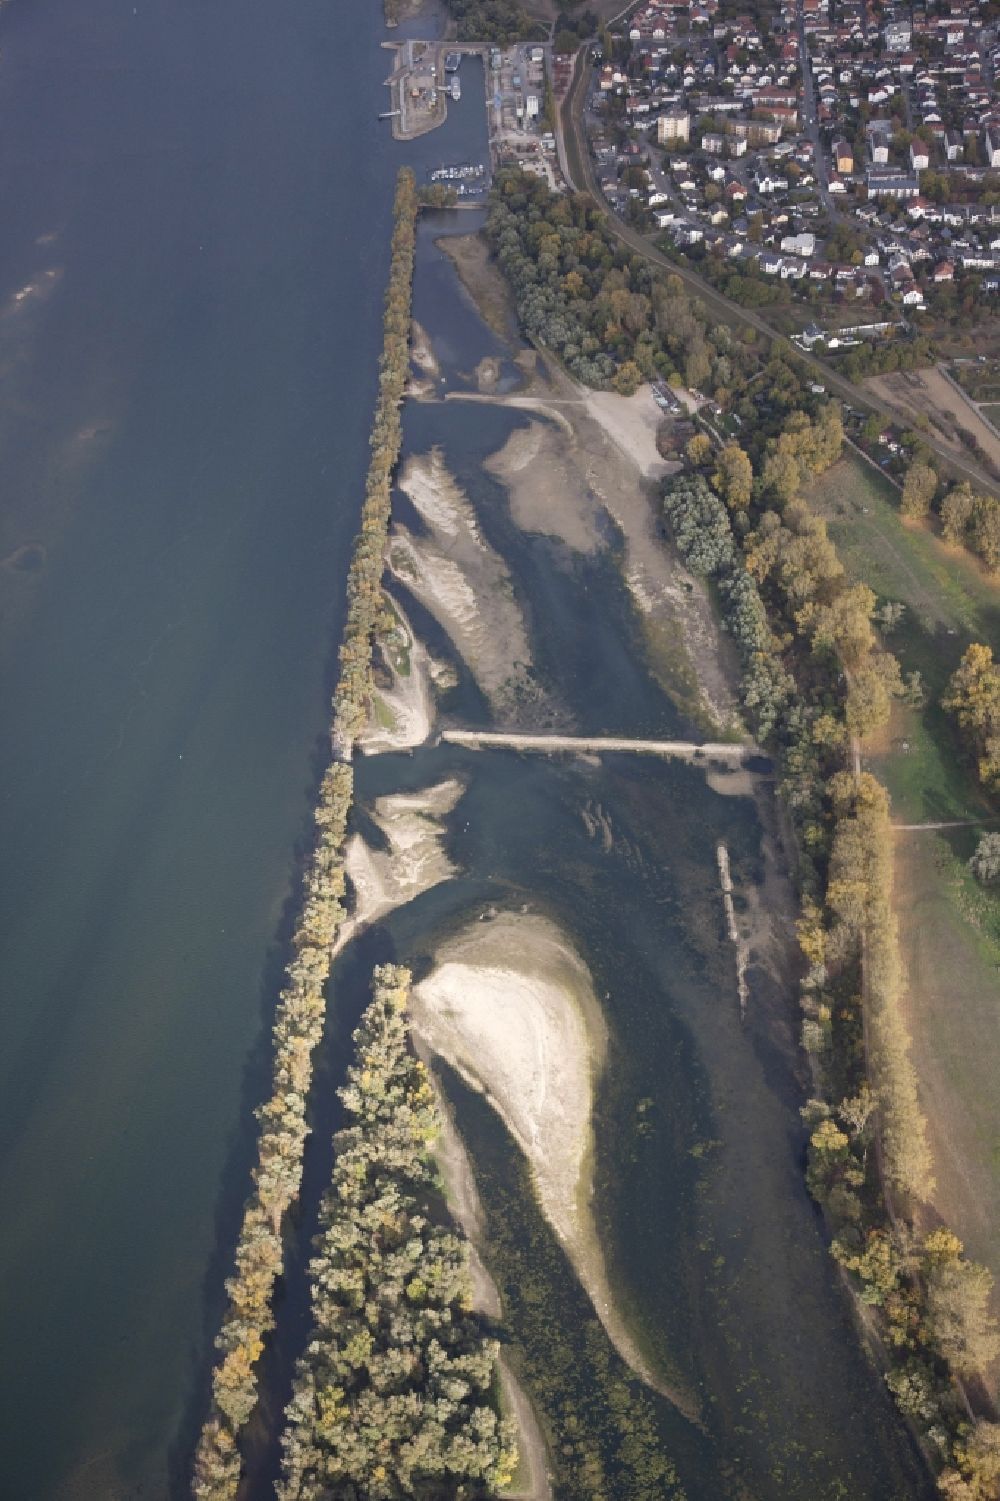 Ingelheim am Rhein from above - Shore areas exposed by low-water level riverbed on the Rhine river in Ingelheim am Rhein in the state Rhineland-Palatinate, Germany